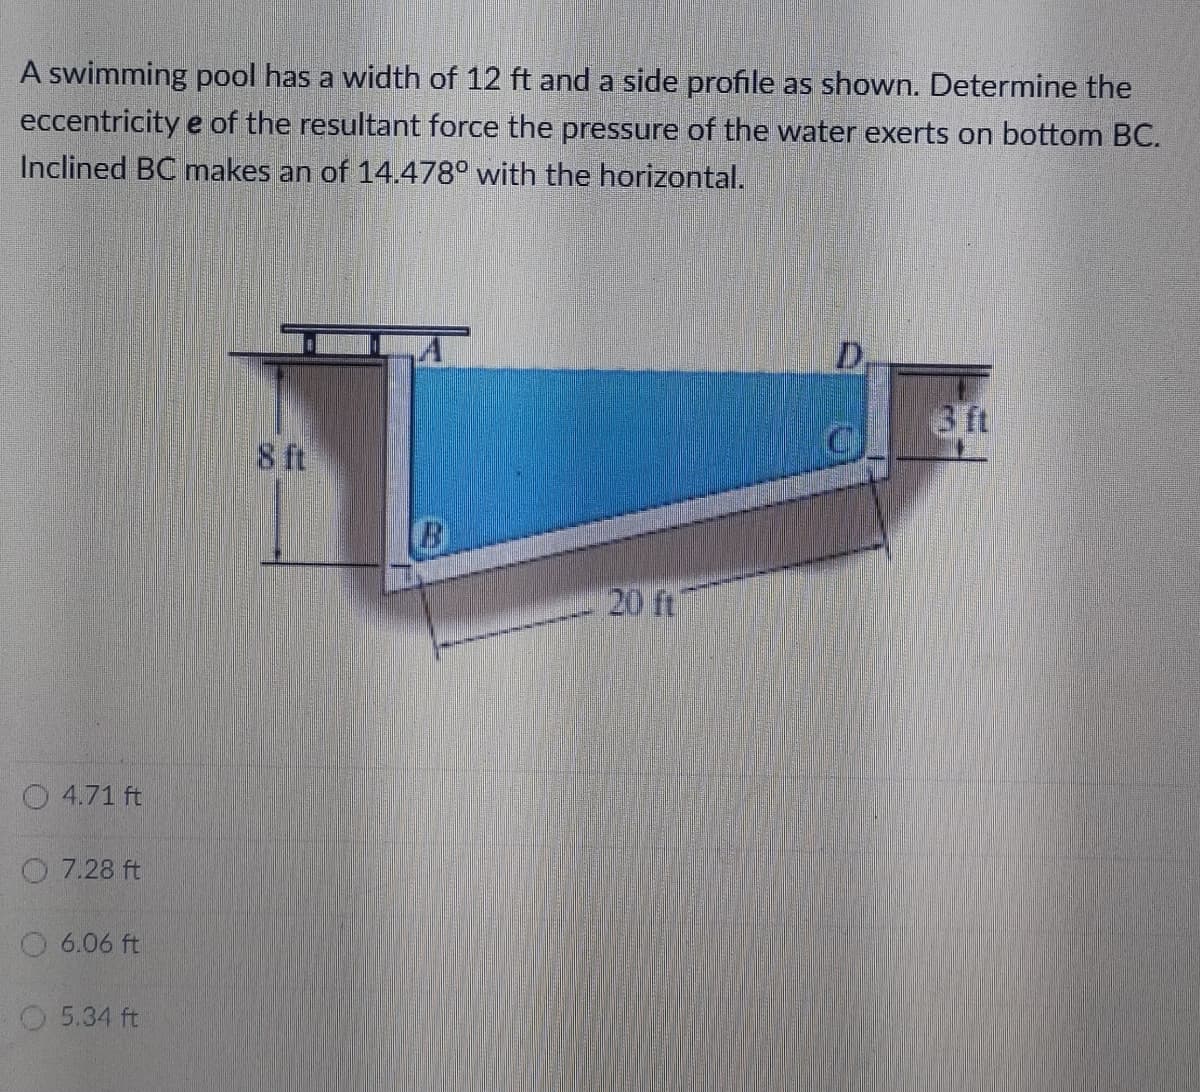 A swimming pool has a width of 12 ft and a side profile as shown. Determine the
eccentricity e of the resultant force the pressure of the water exerts on bottom BC.
Inclined BC makes an of 14.478° with the horizontal.
D,
3 ft
8 ft
B
20 ft
O 4.71 ft
O 7.28 ft
O 6.06 ft
O 5.34 ft
